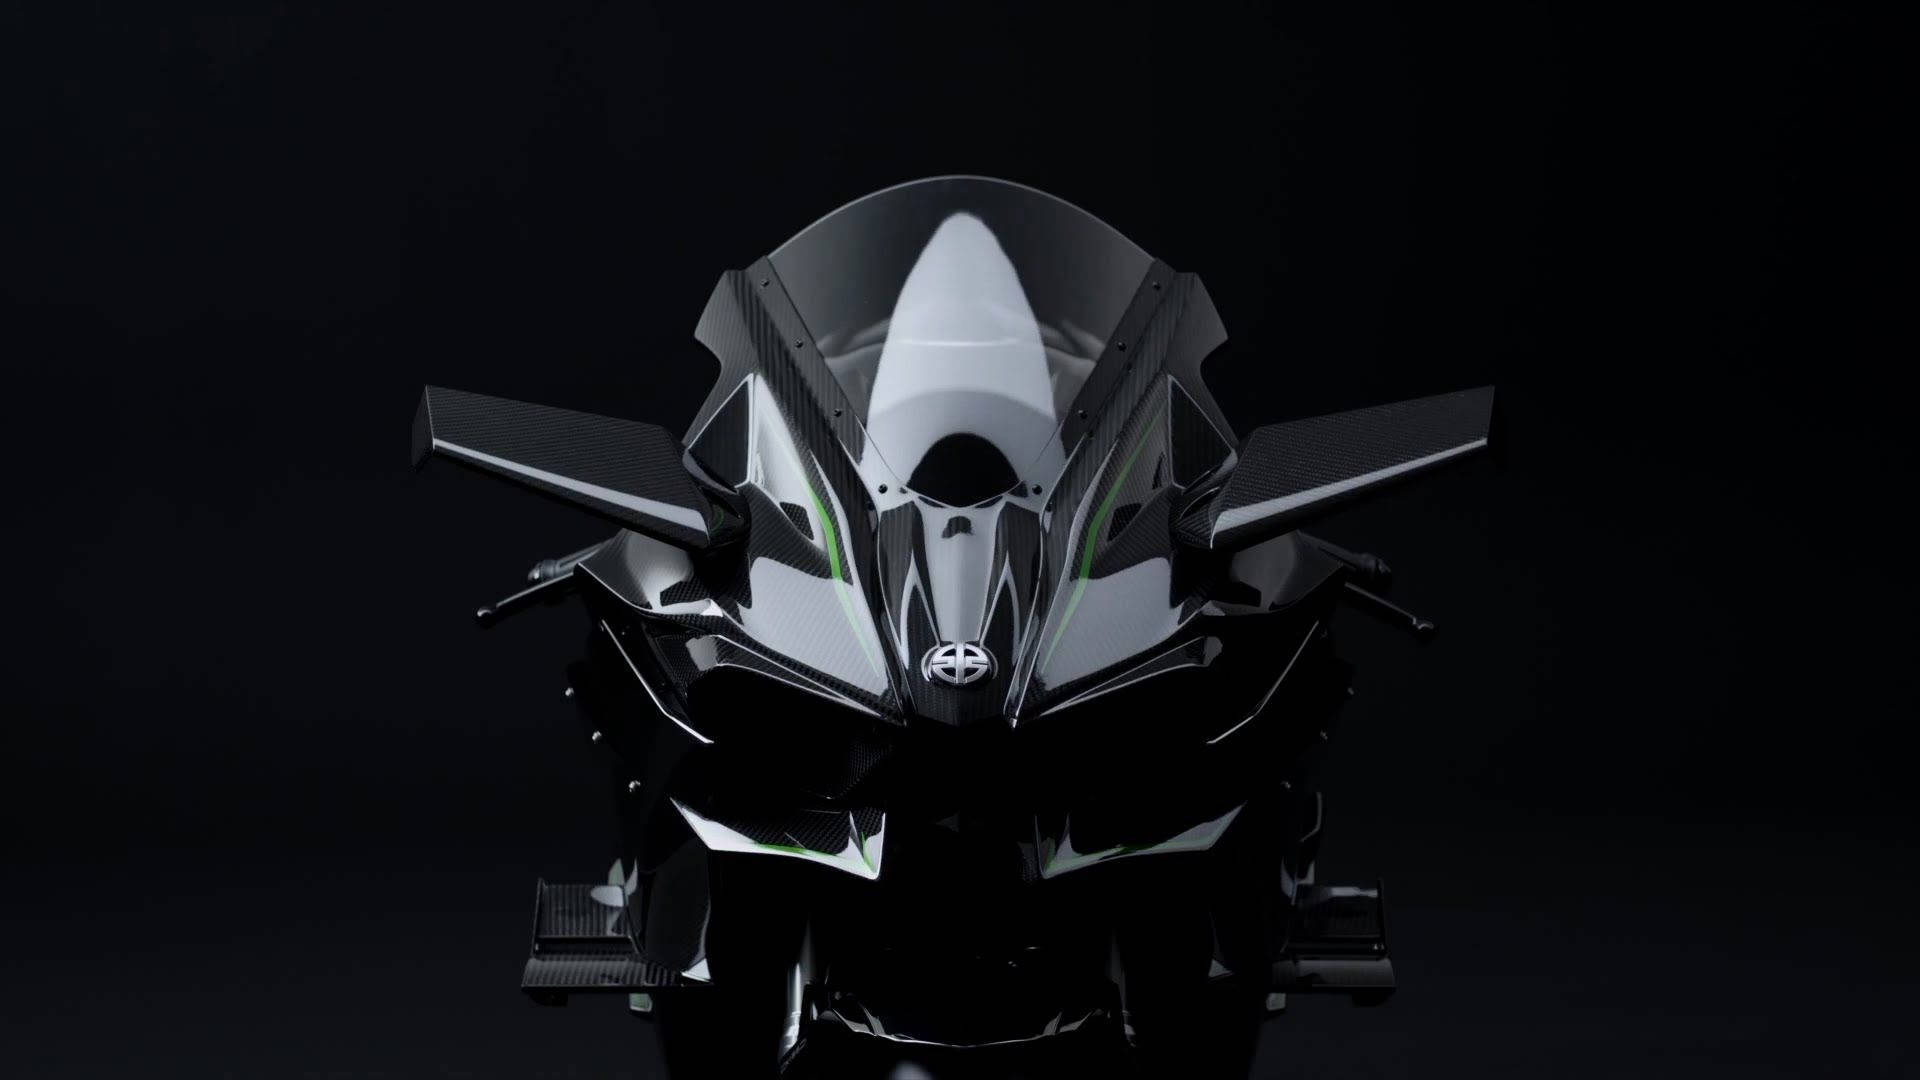 Impressive Front Features of the Black Kawasaki H2R Motorcycle Wallpaper